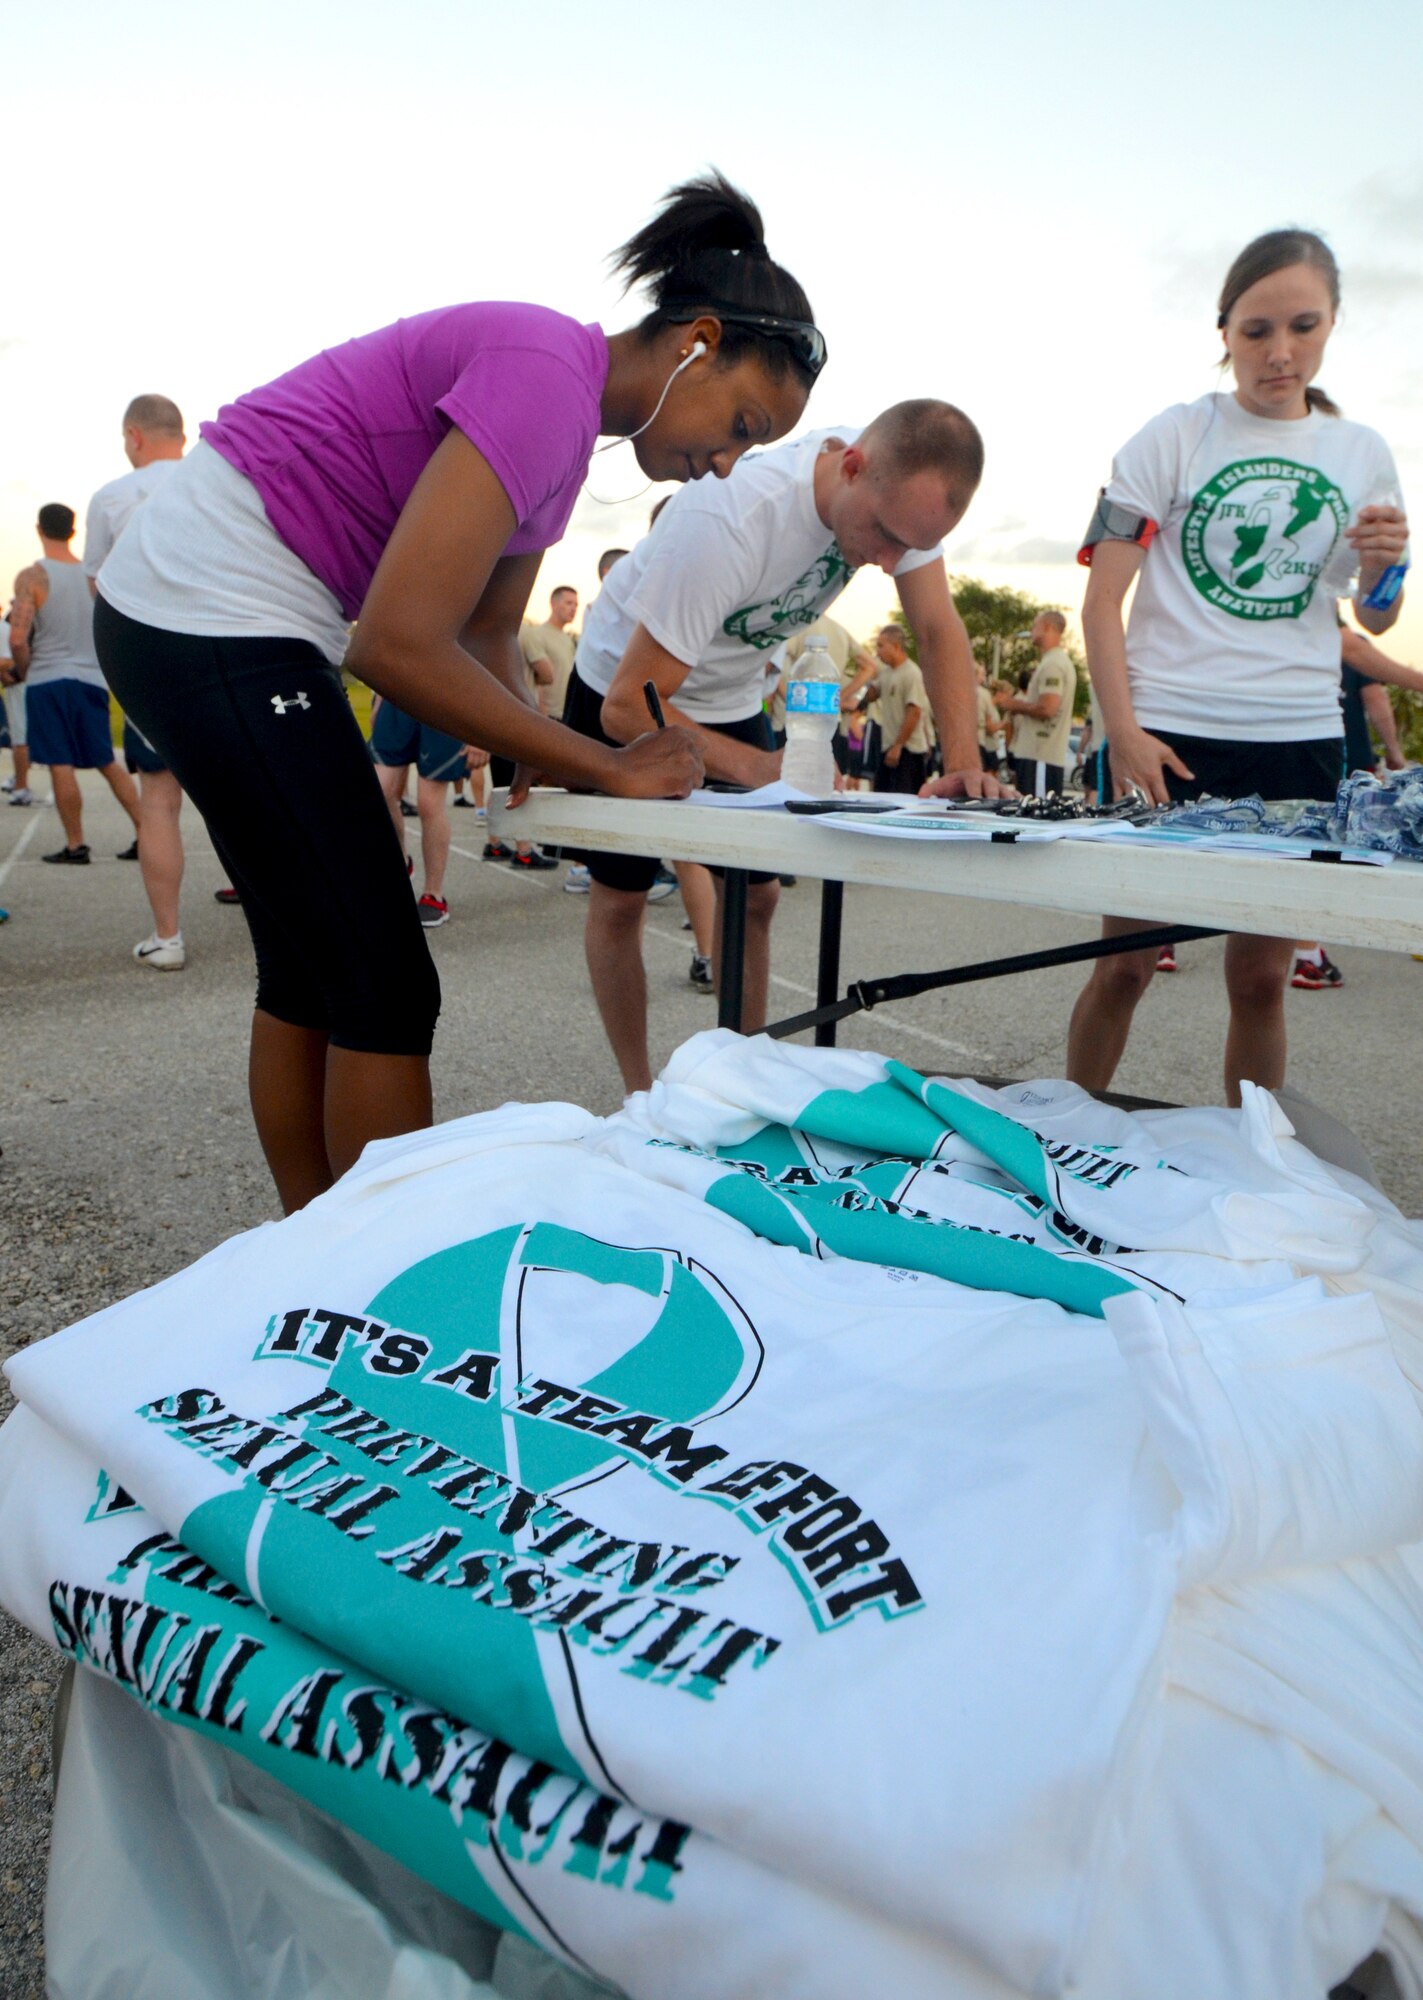 Members of Team Andersen sign up for the Sexual Assault Awareness Month 5K run on Andersen Air Force Base, Guam, April 3, 2013. The month of April is National Sexual Assault Awareness Month, and the 36th Wing has several events planned to show support in the fight against sexual assault. (U.S. Air Force photo by Senior Airman Benjamin Wiseman/Released)